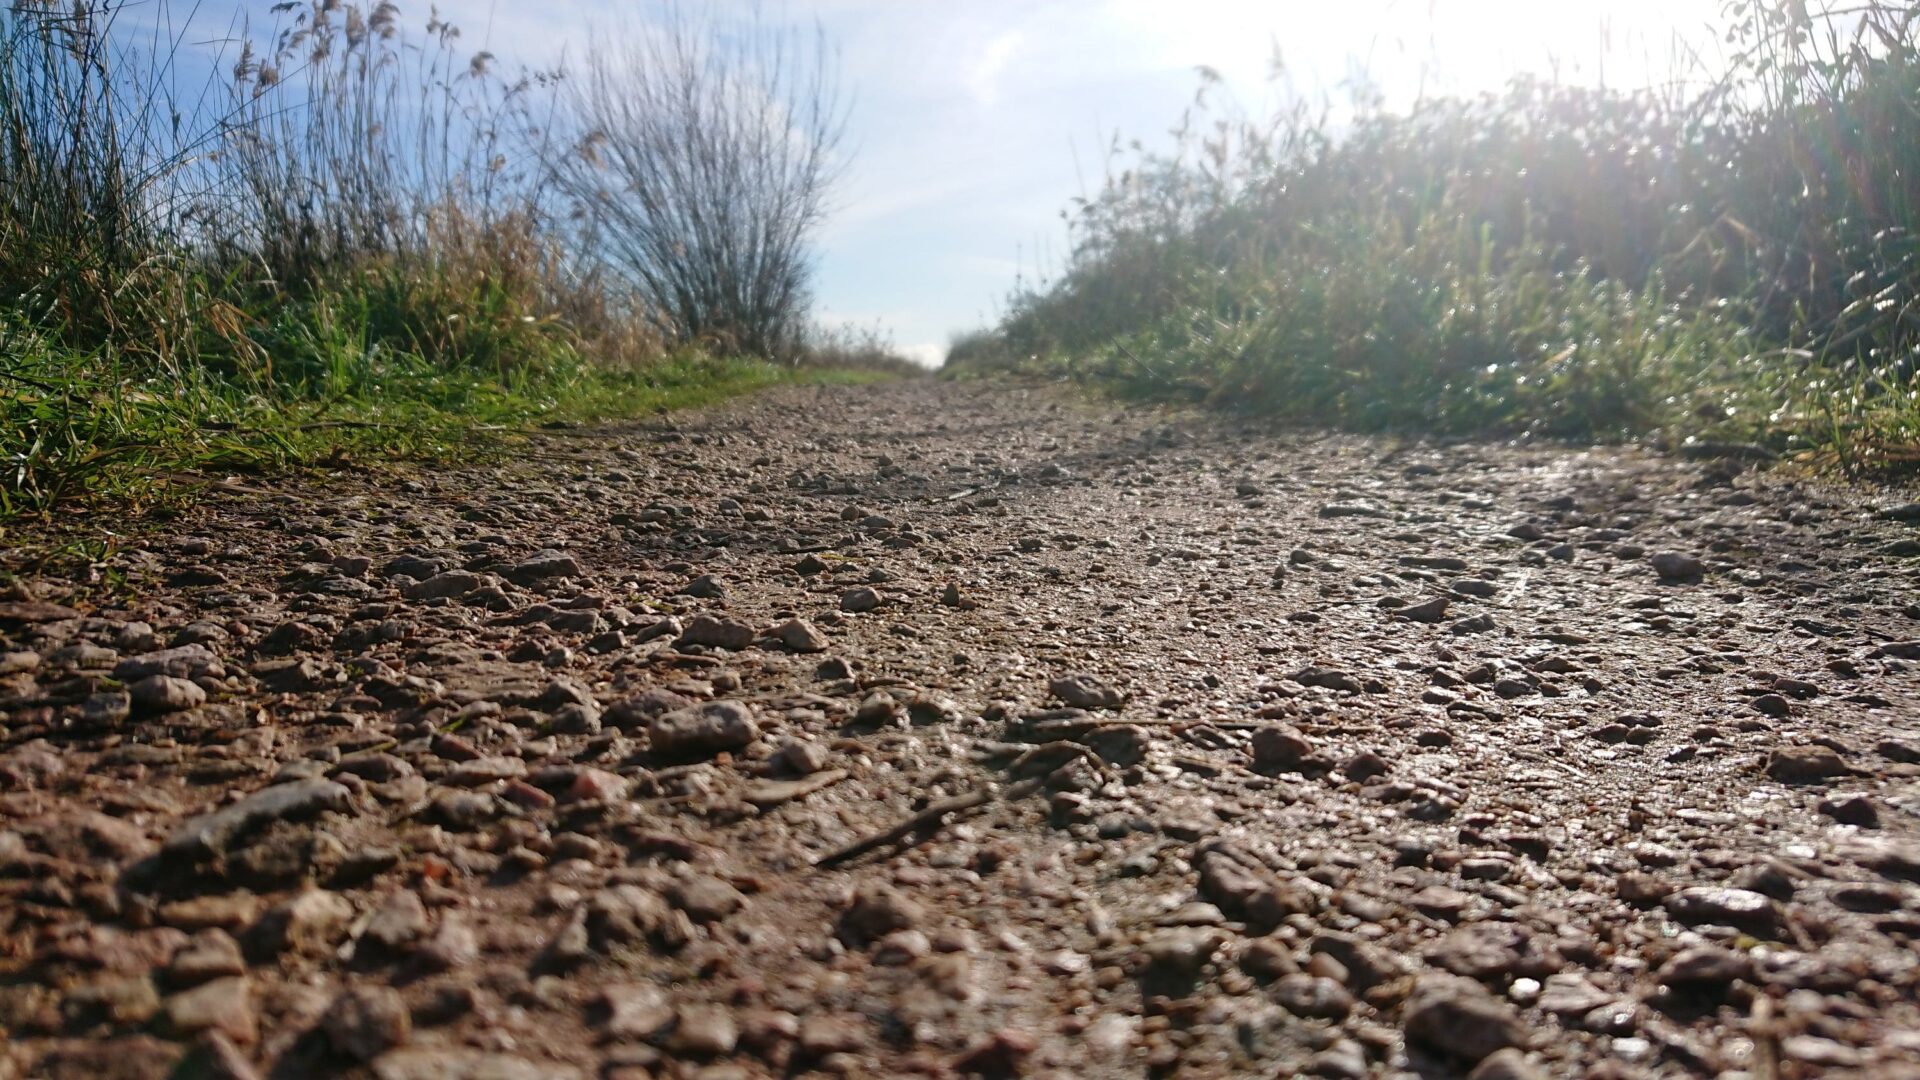 The barefoot sub walked along this gravel path in One step at a time is good walking